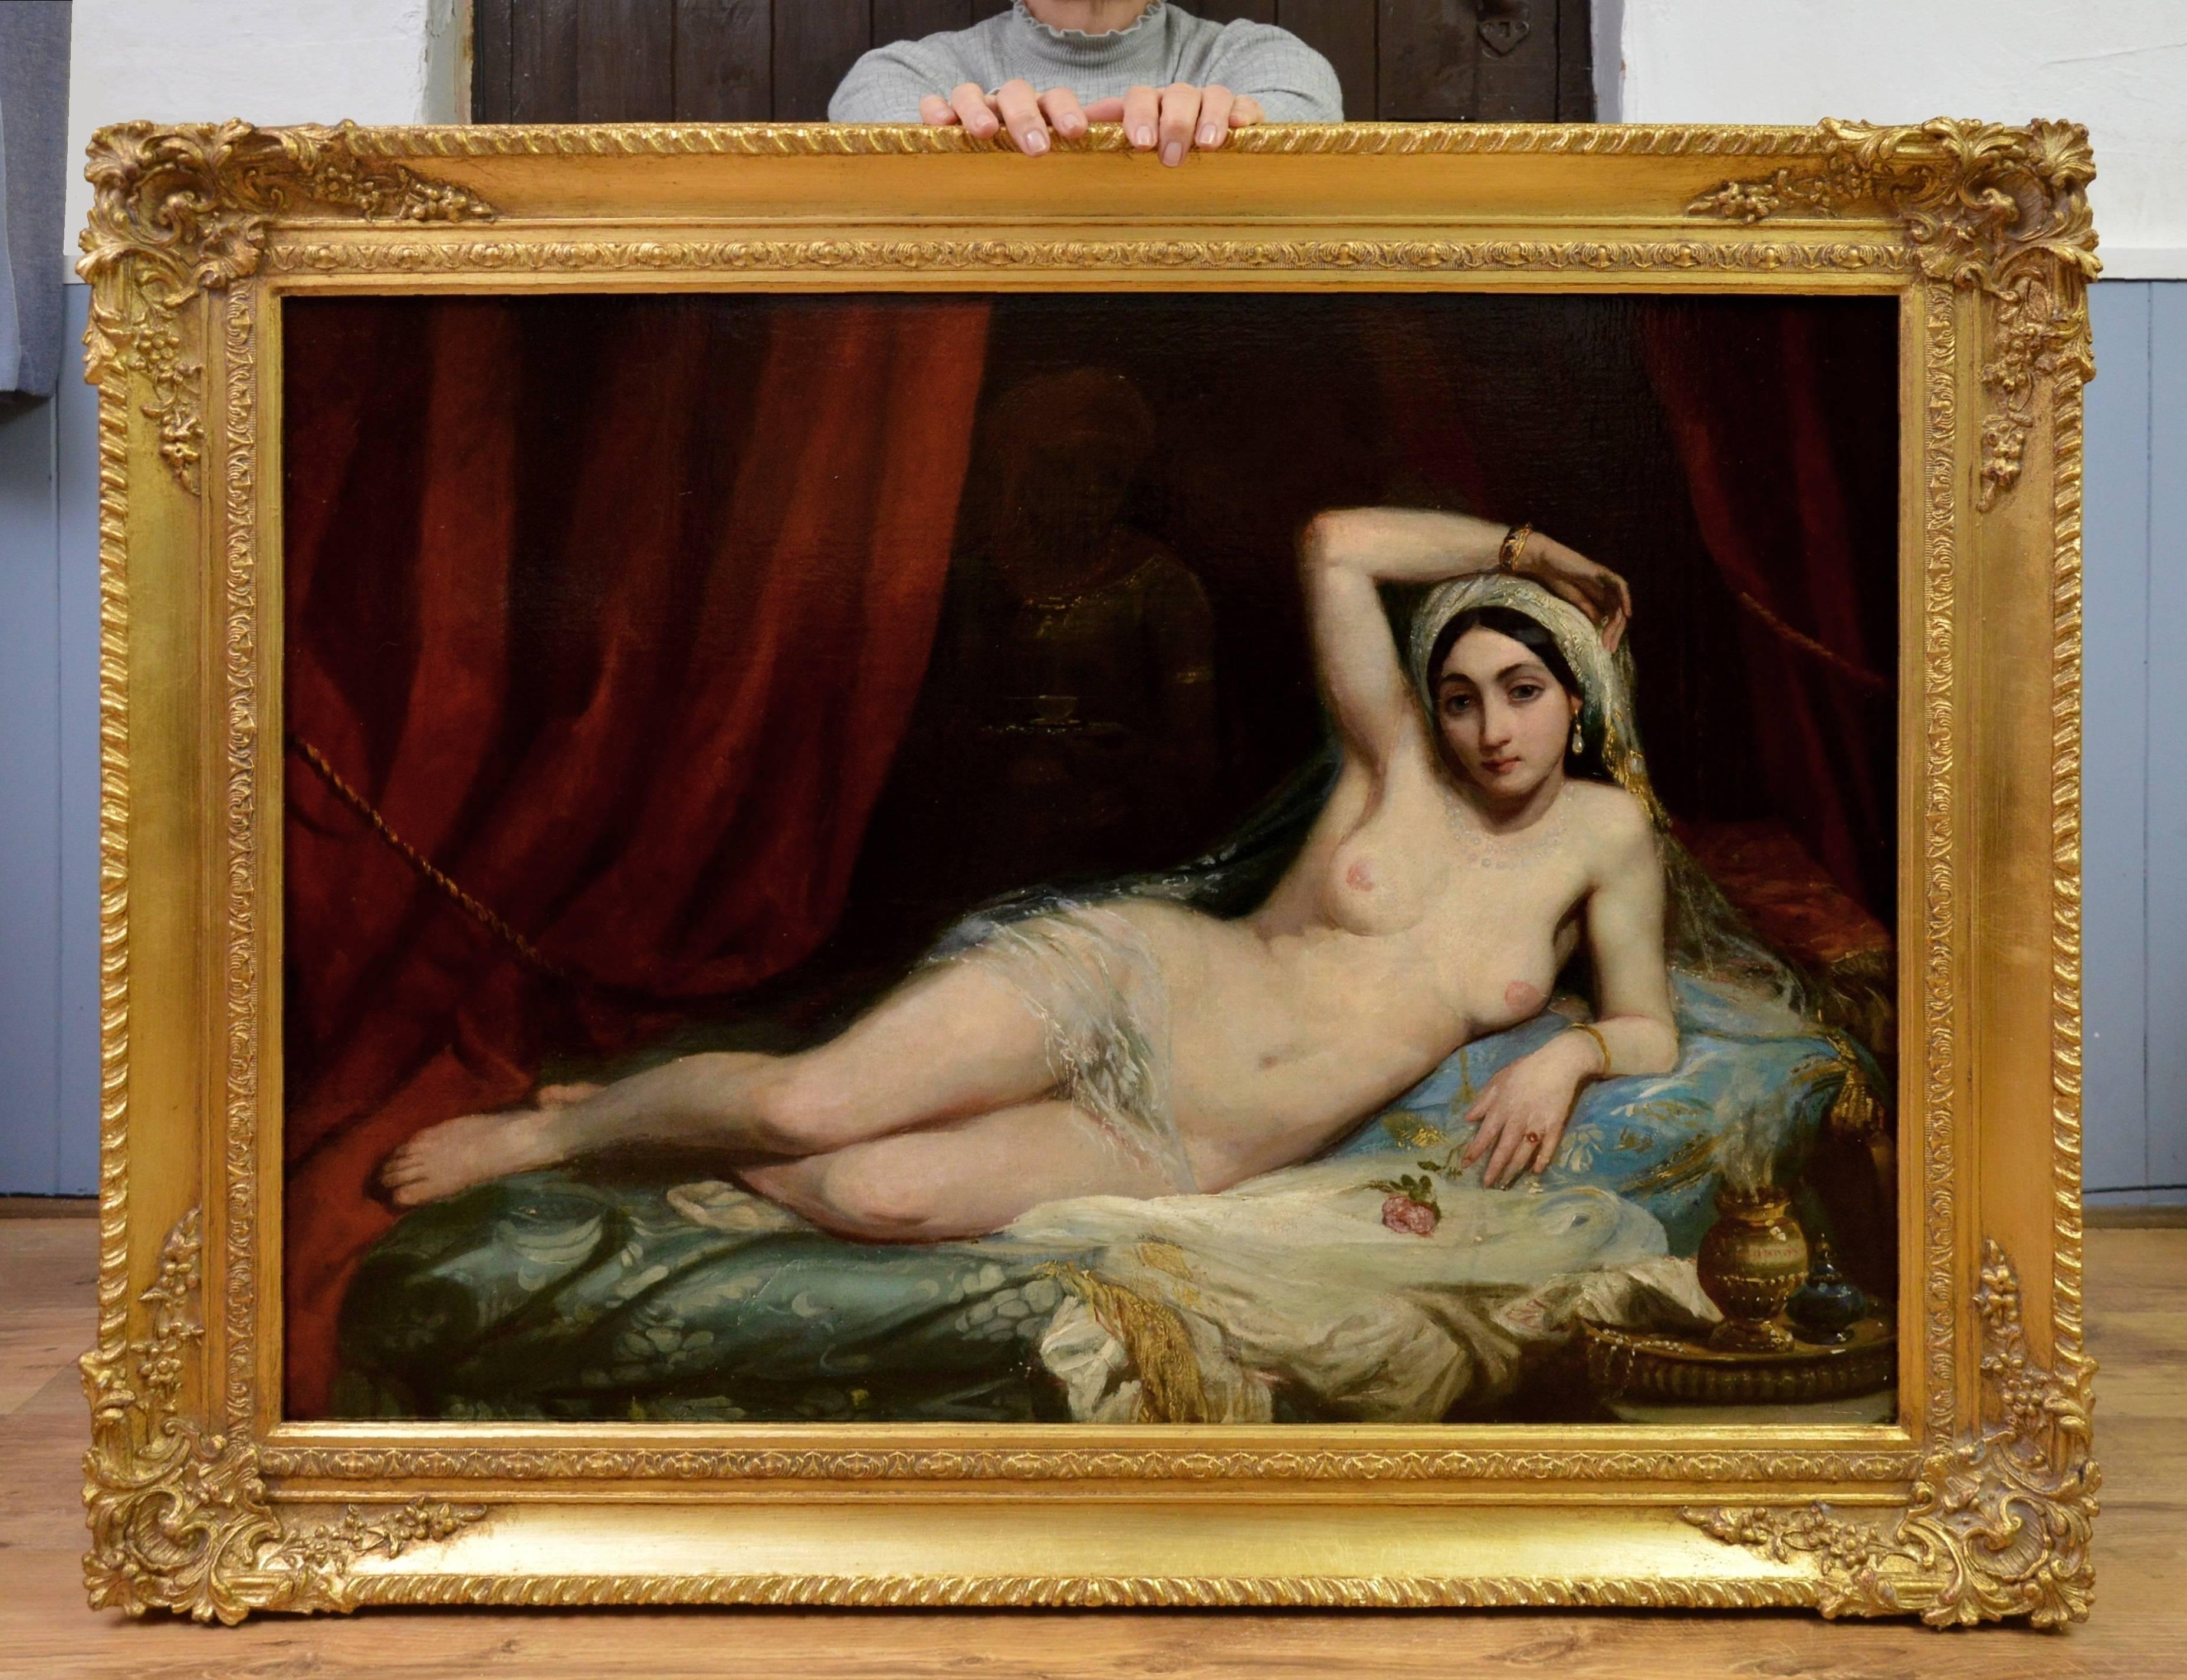 This is a large fine 19th century oil on canvas depicting a harem girl or odalisque reclining in an Oriental seraglio by an artist of the circle of the famous French painter Henri Adrien Tanoux (1865-1923). The painting hangs in a superb quality